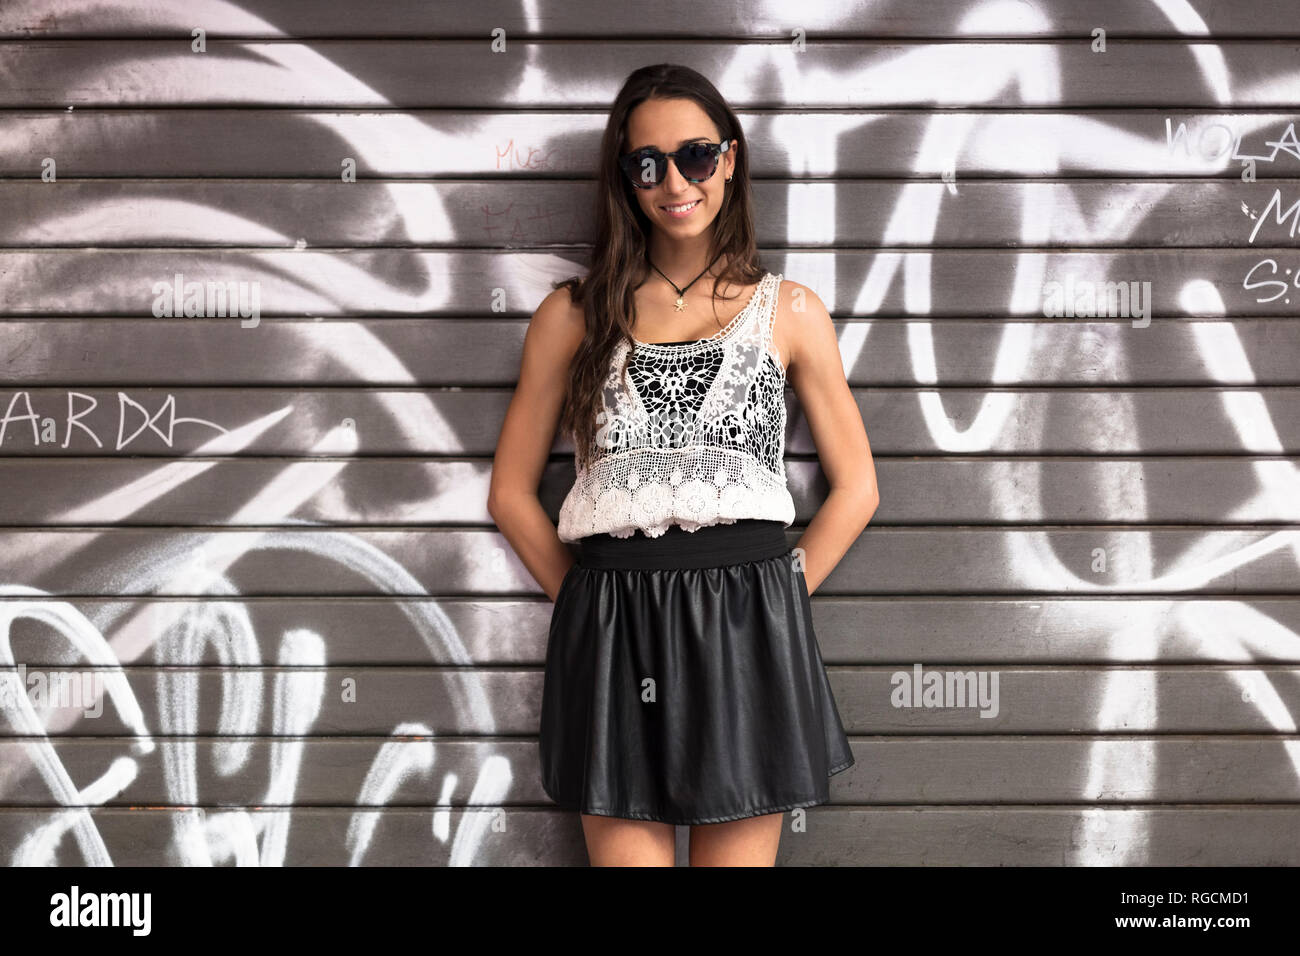 Portrait of fashionable young woman wearing sunglasses standing in front of graffito Stock Photo